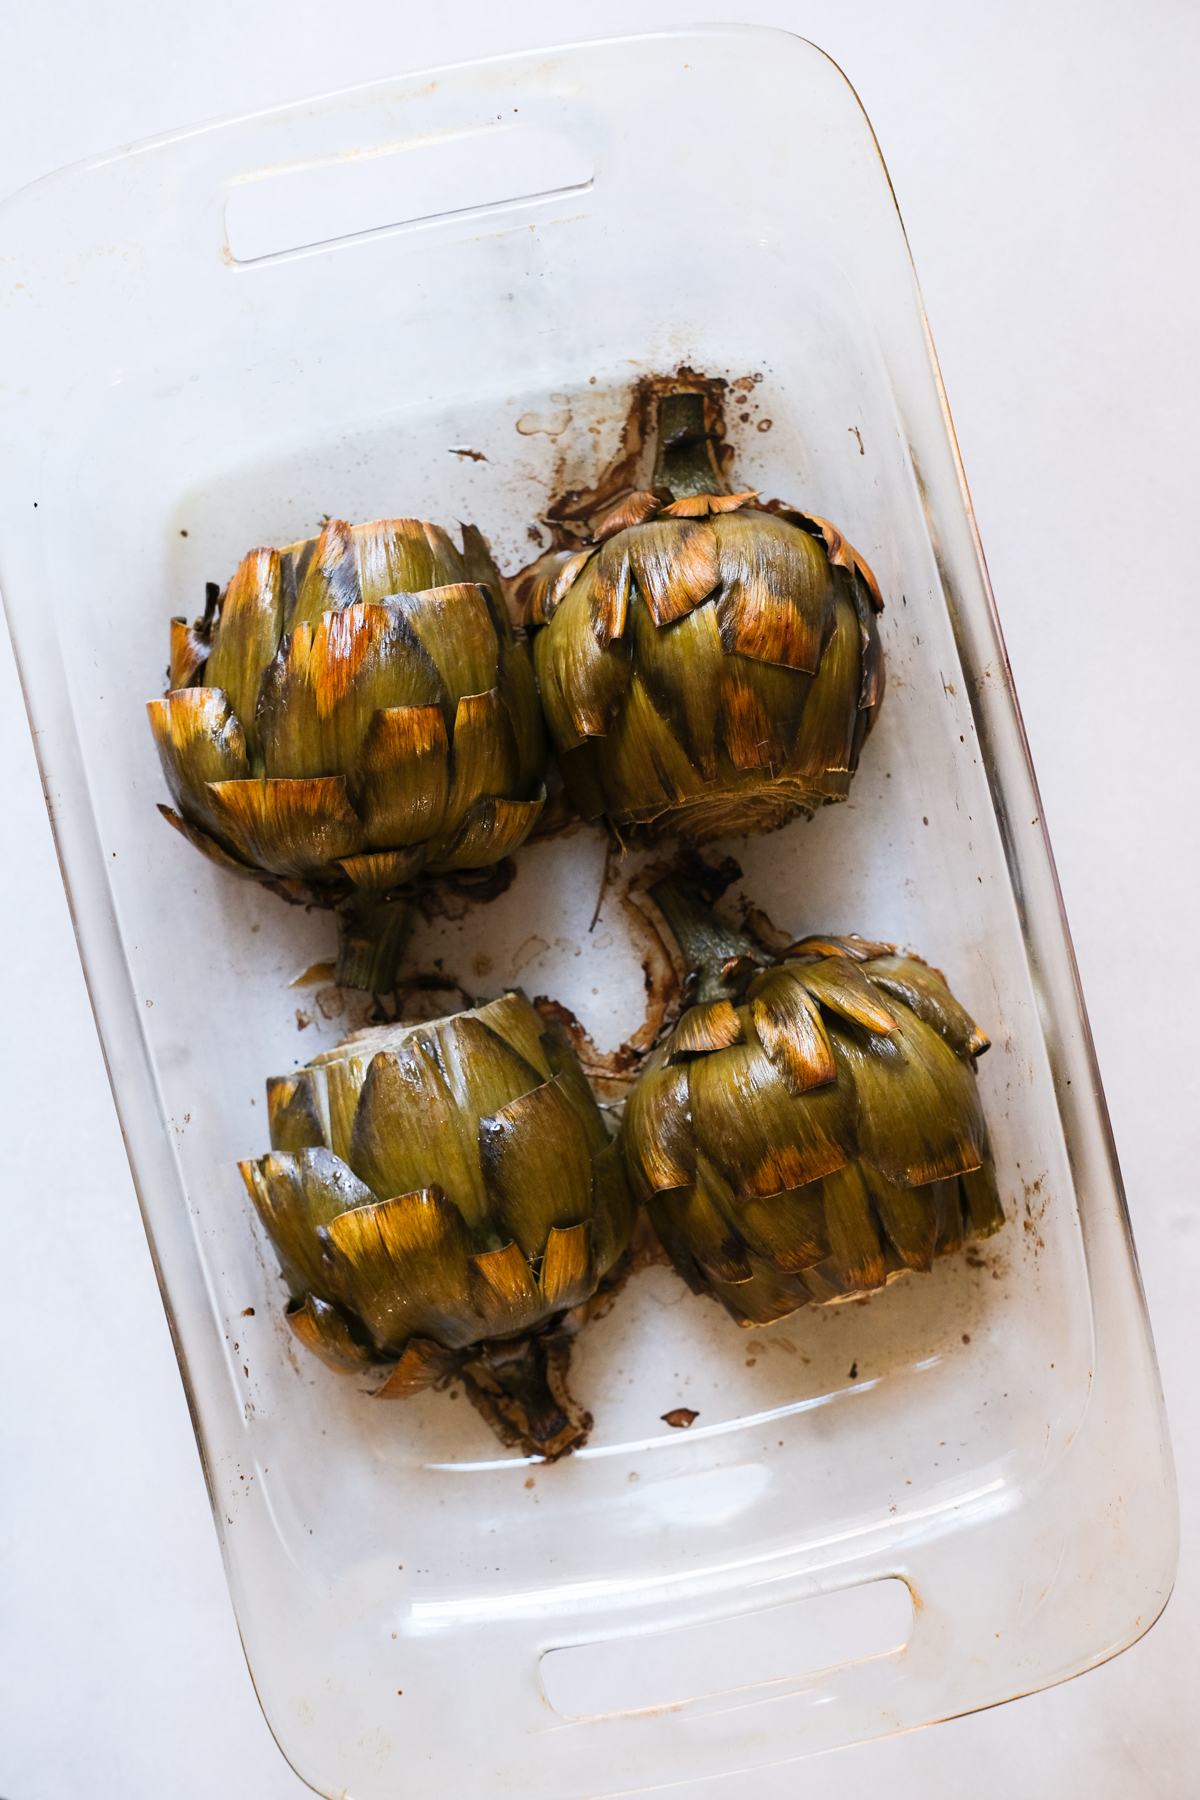 roasted artichokes in a glass dish